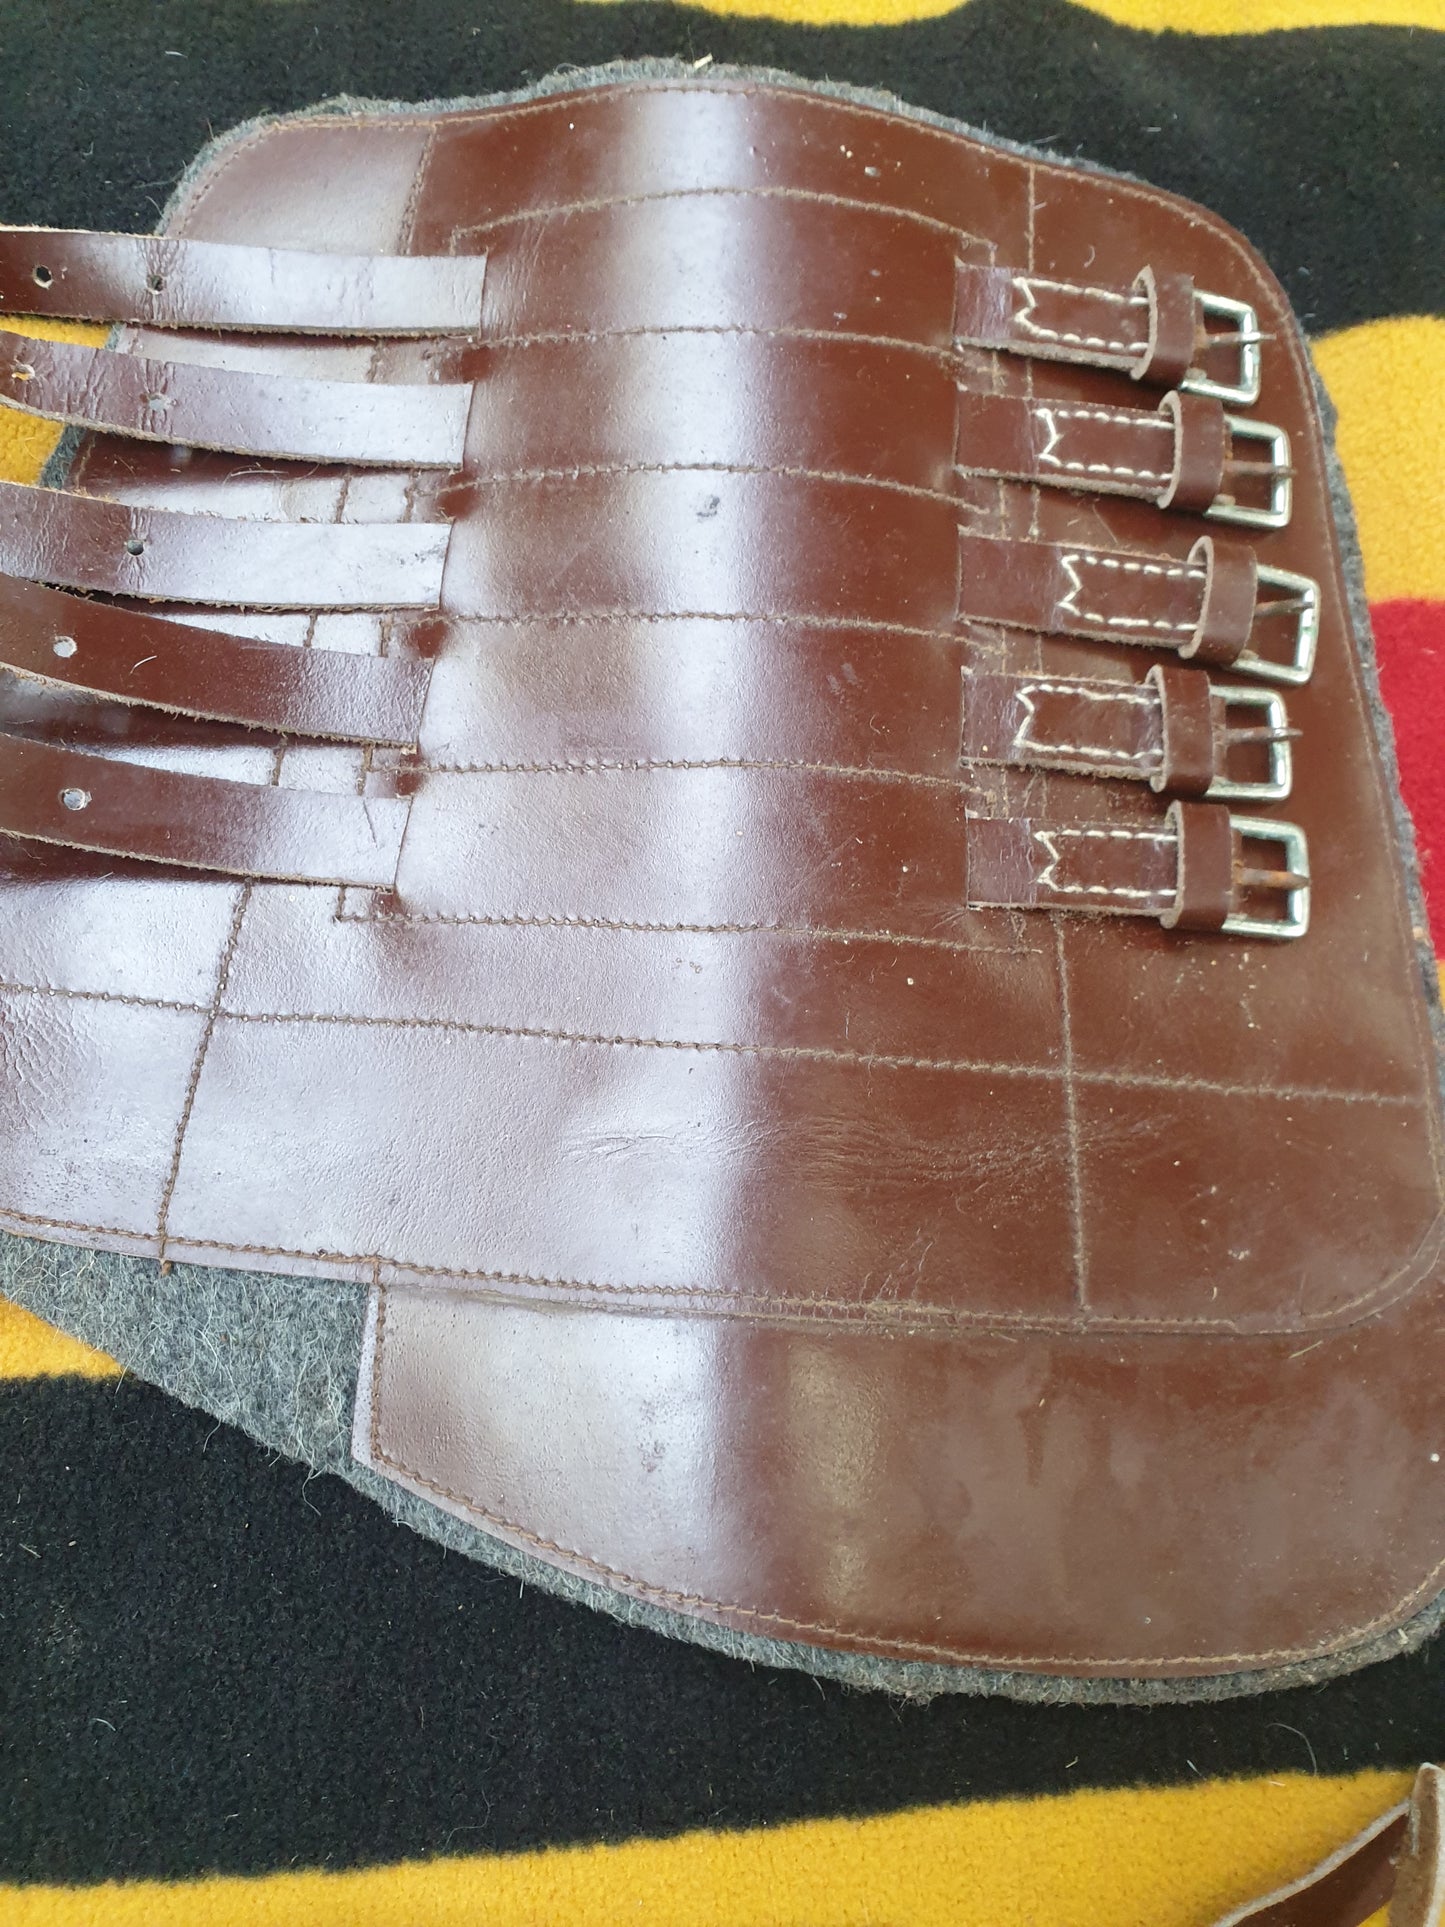 Used full size brown leather tendon boots FREE POSTAGE☆